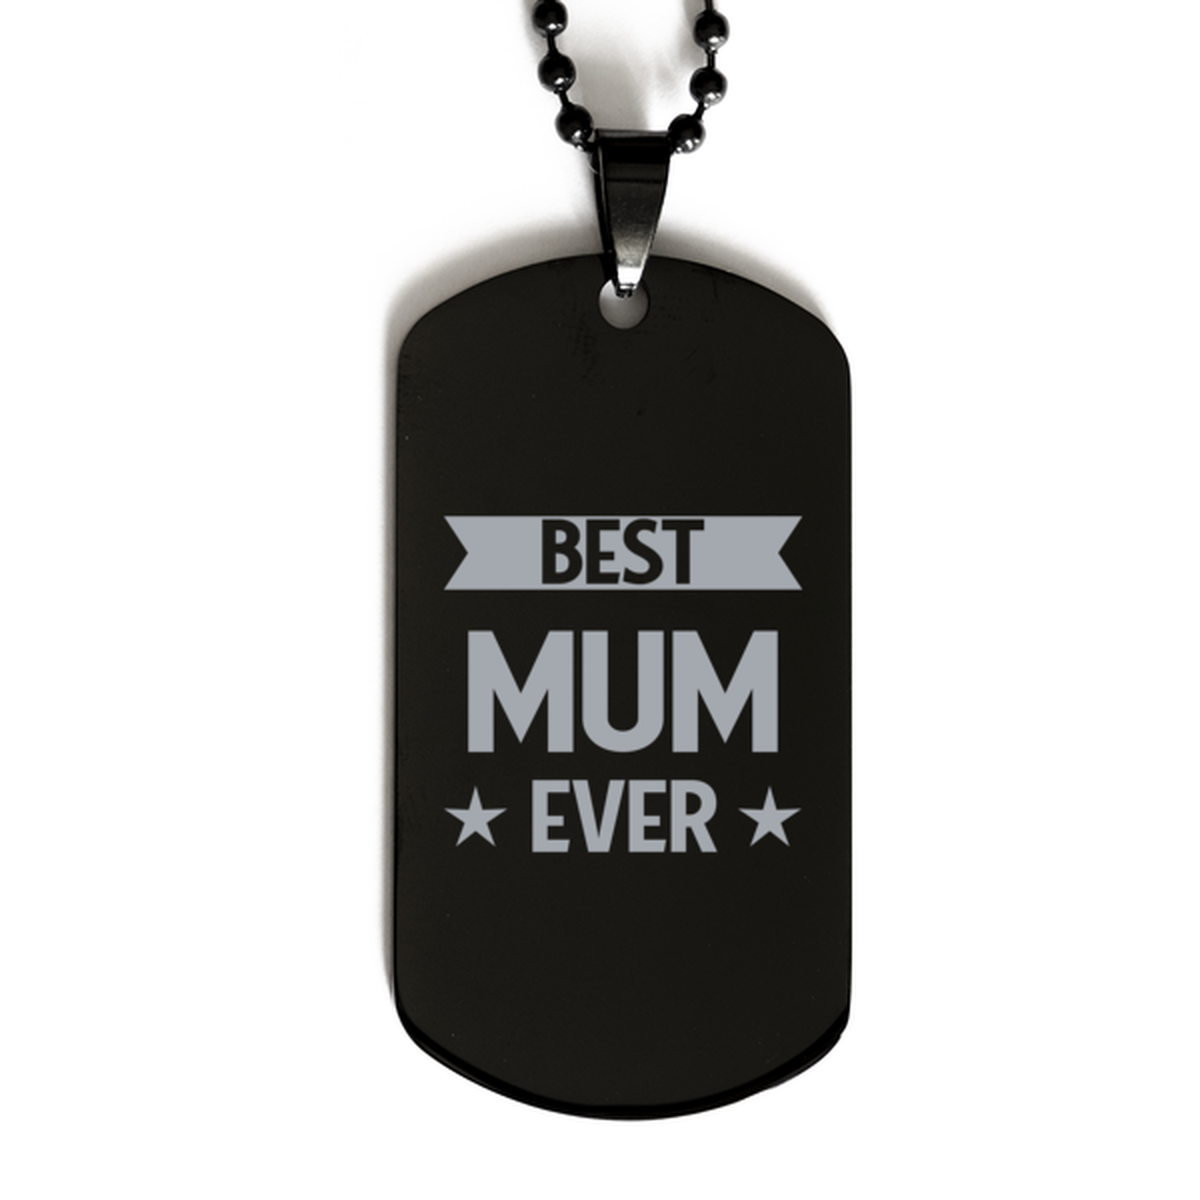 Best Mum Ever Mum Gifts, Funny Black Dog Tag For Mum, Birthday Family Presents Engraved Necklace For Women